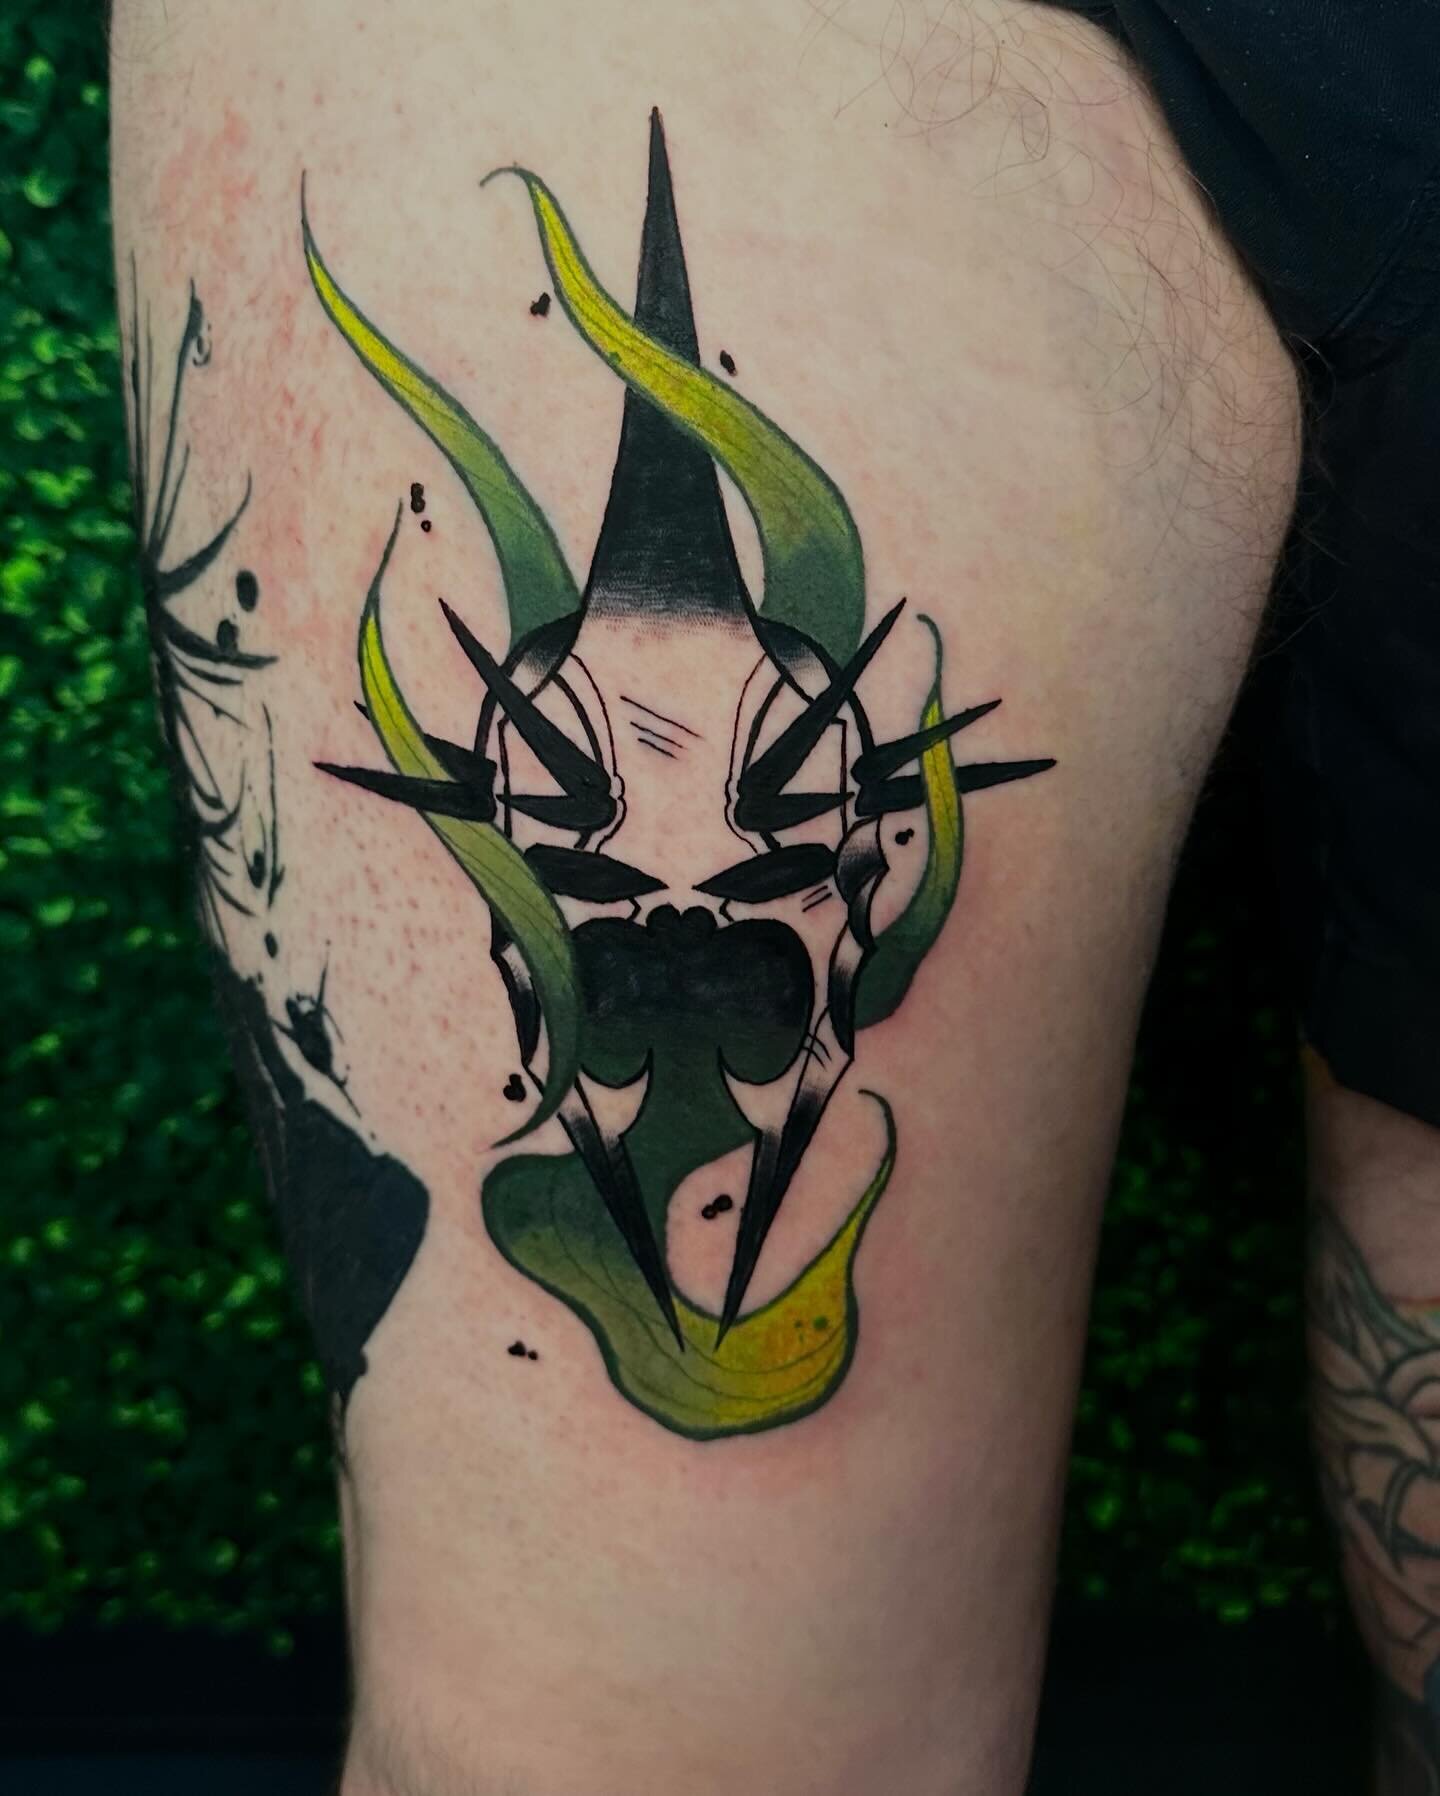 You know his swag but not his story. 

Witch King of Angmar on my good friend @__danny.phantom__ 

I love The Lord of the Rings so much and I&rsquo;m so stoked I got to finally do something from it! If you&rsquo;re wanting some hard lord of the rings